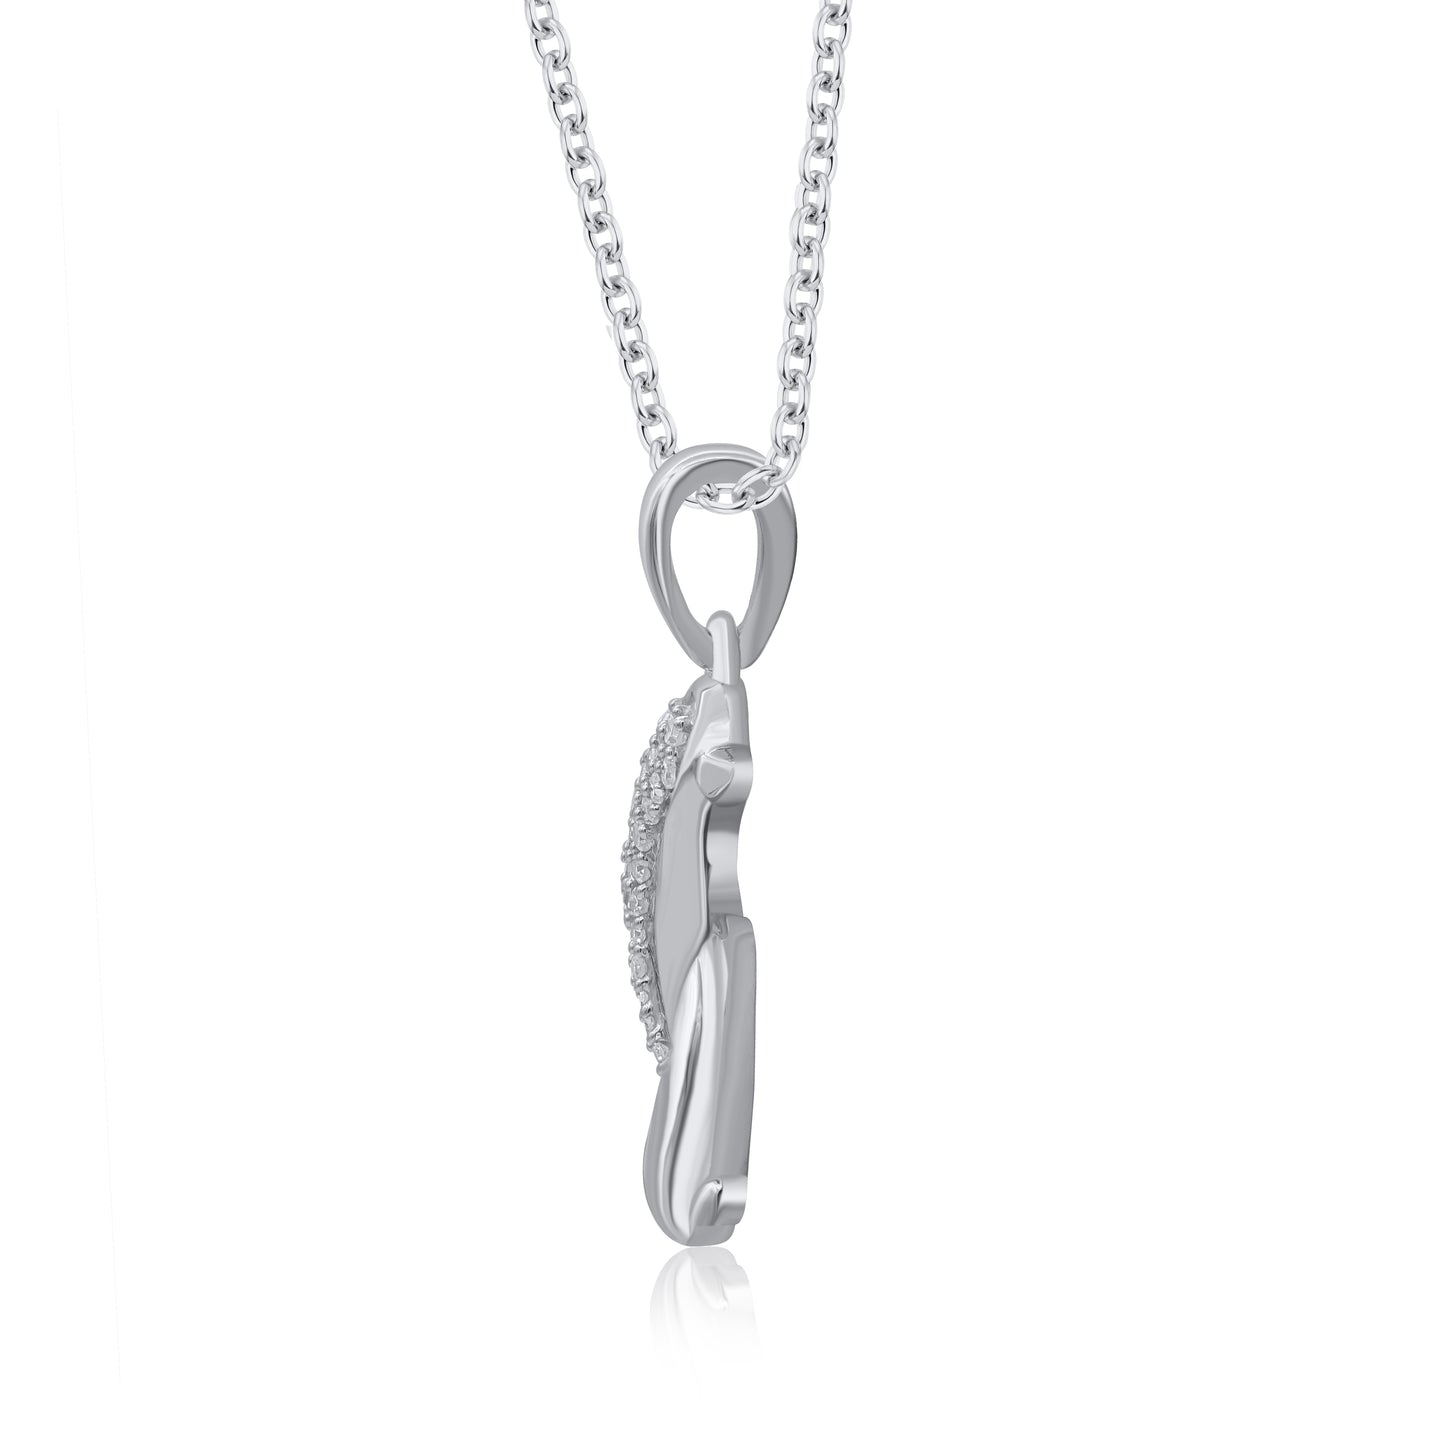 Dolphin Heart Pendant Necklace in 925 Sterling Silver